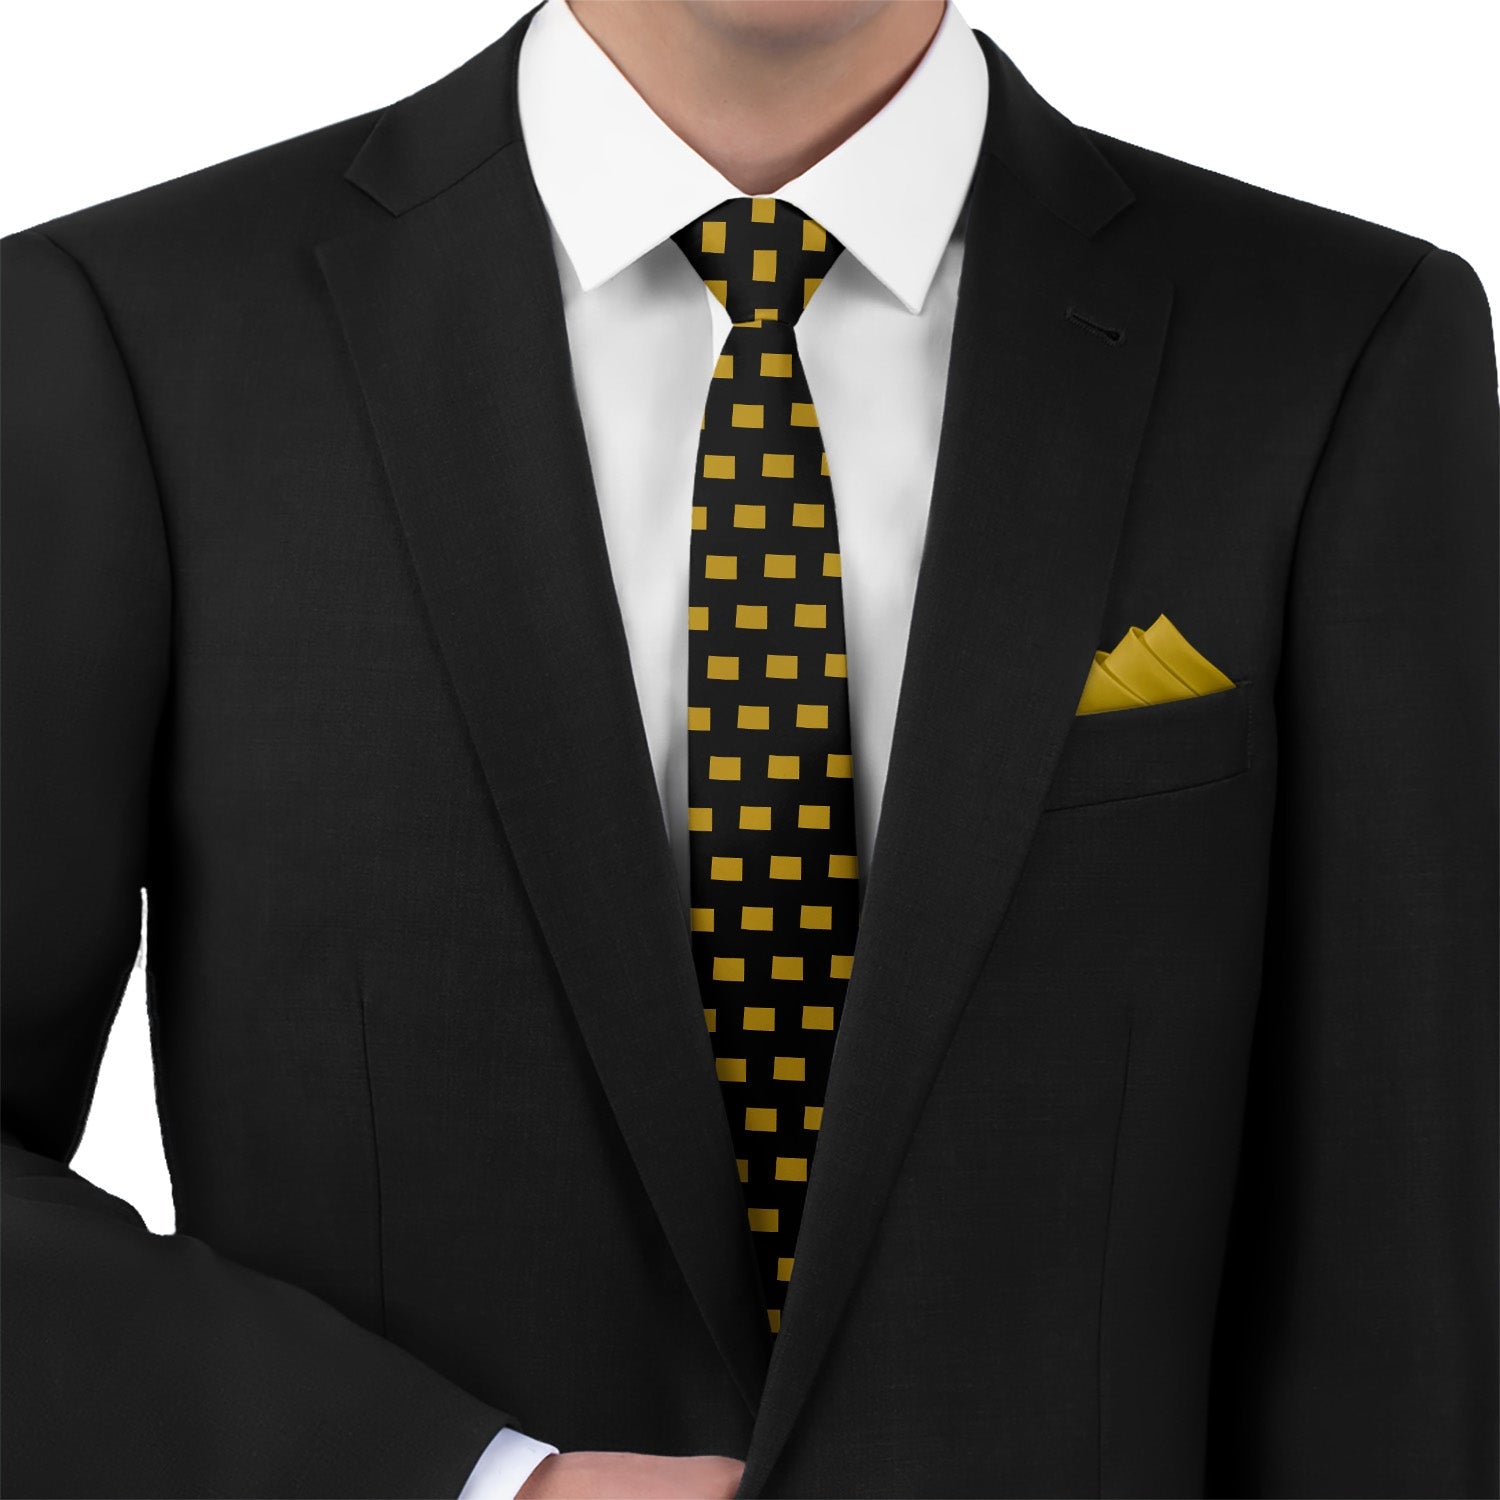 Colorado State Outline Necktie - Matching Pocket Square - Knotty Tie Co.